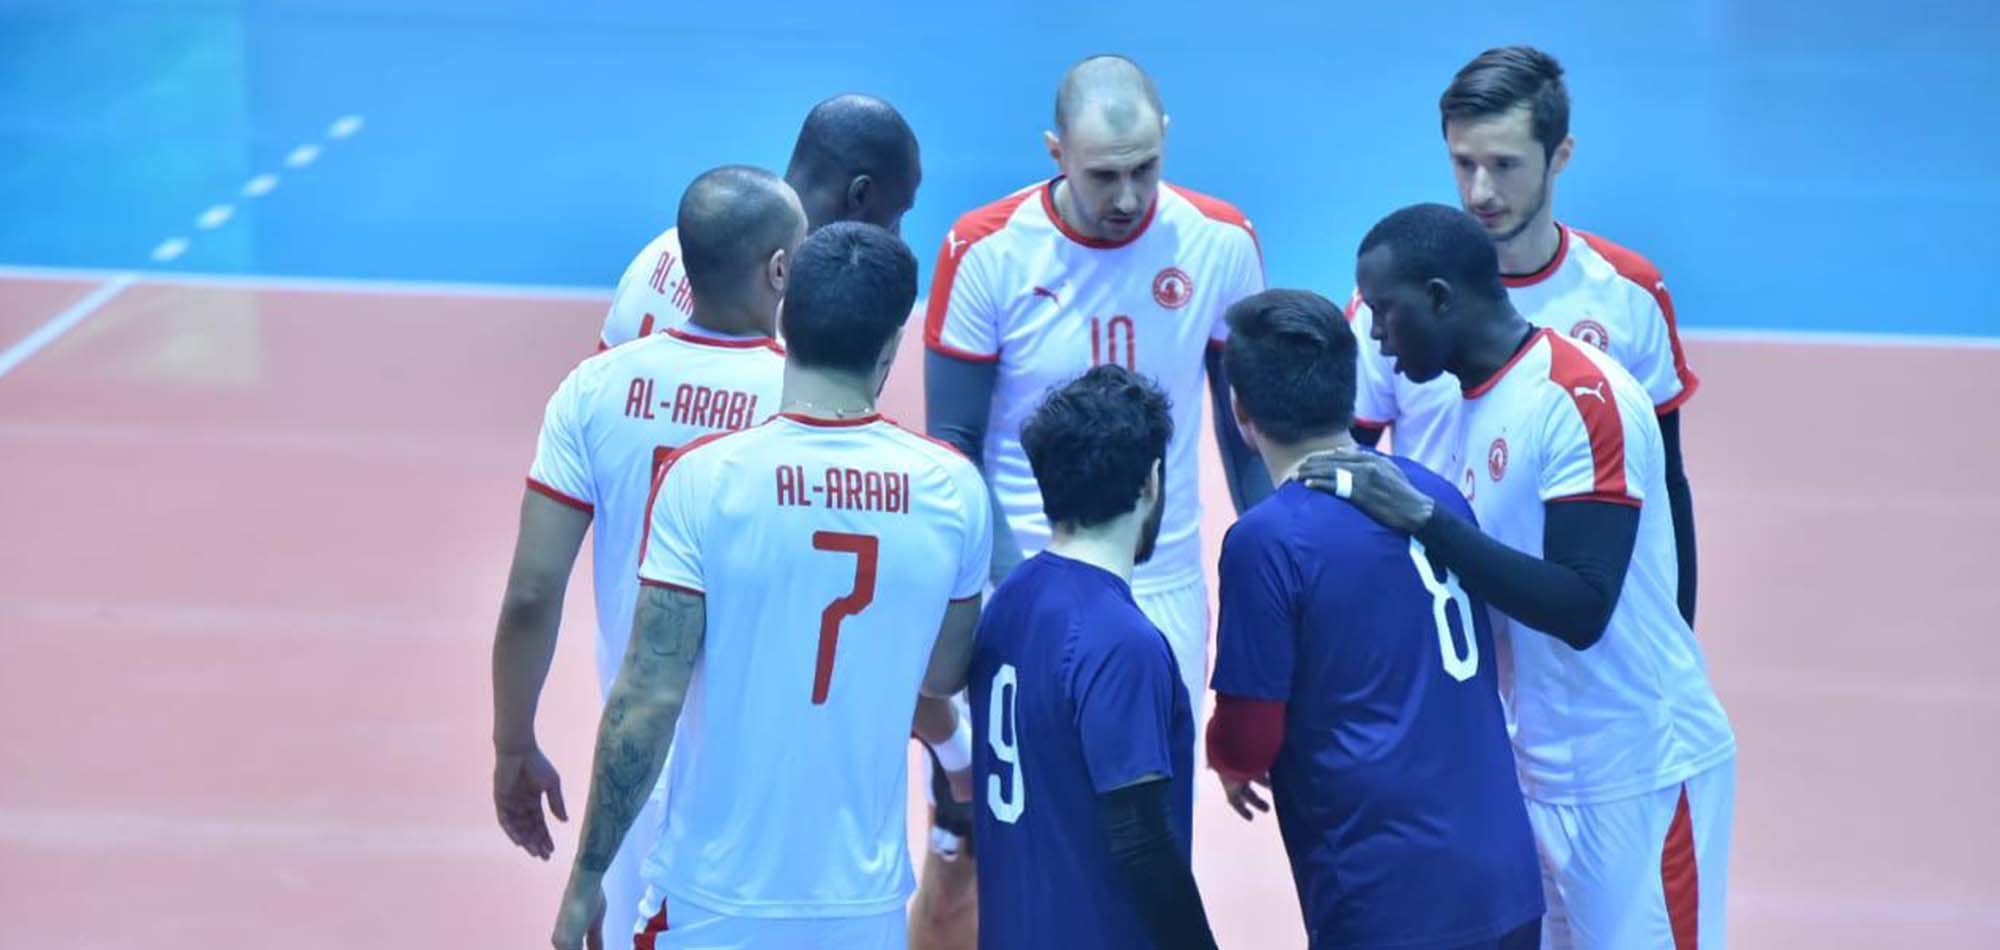 Arabi faces Kuwaiti Kazma in the quarter-finals of the 38th Arab Championship for men’s volleyball